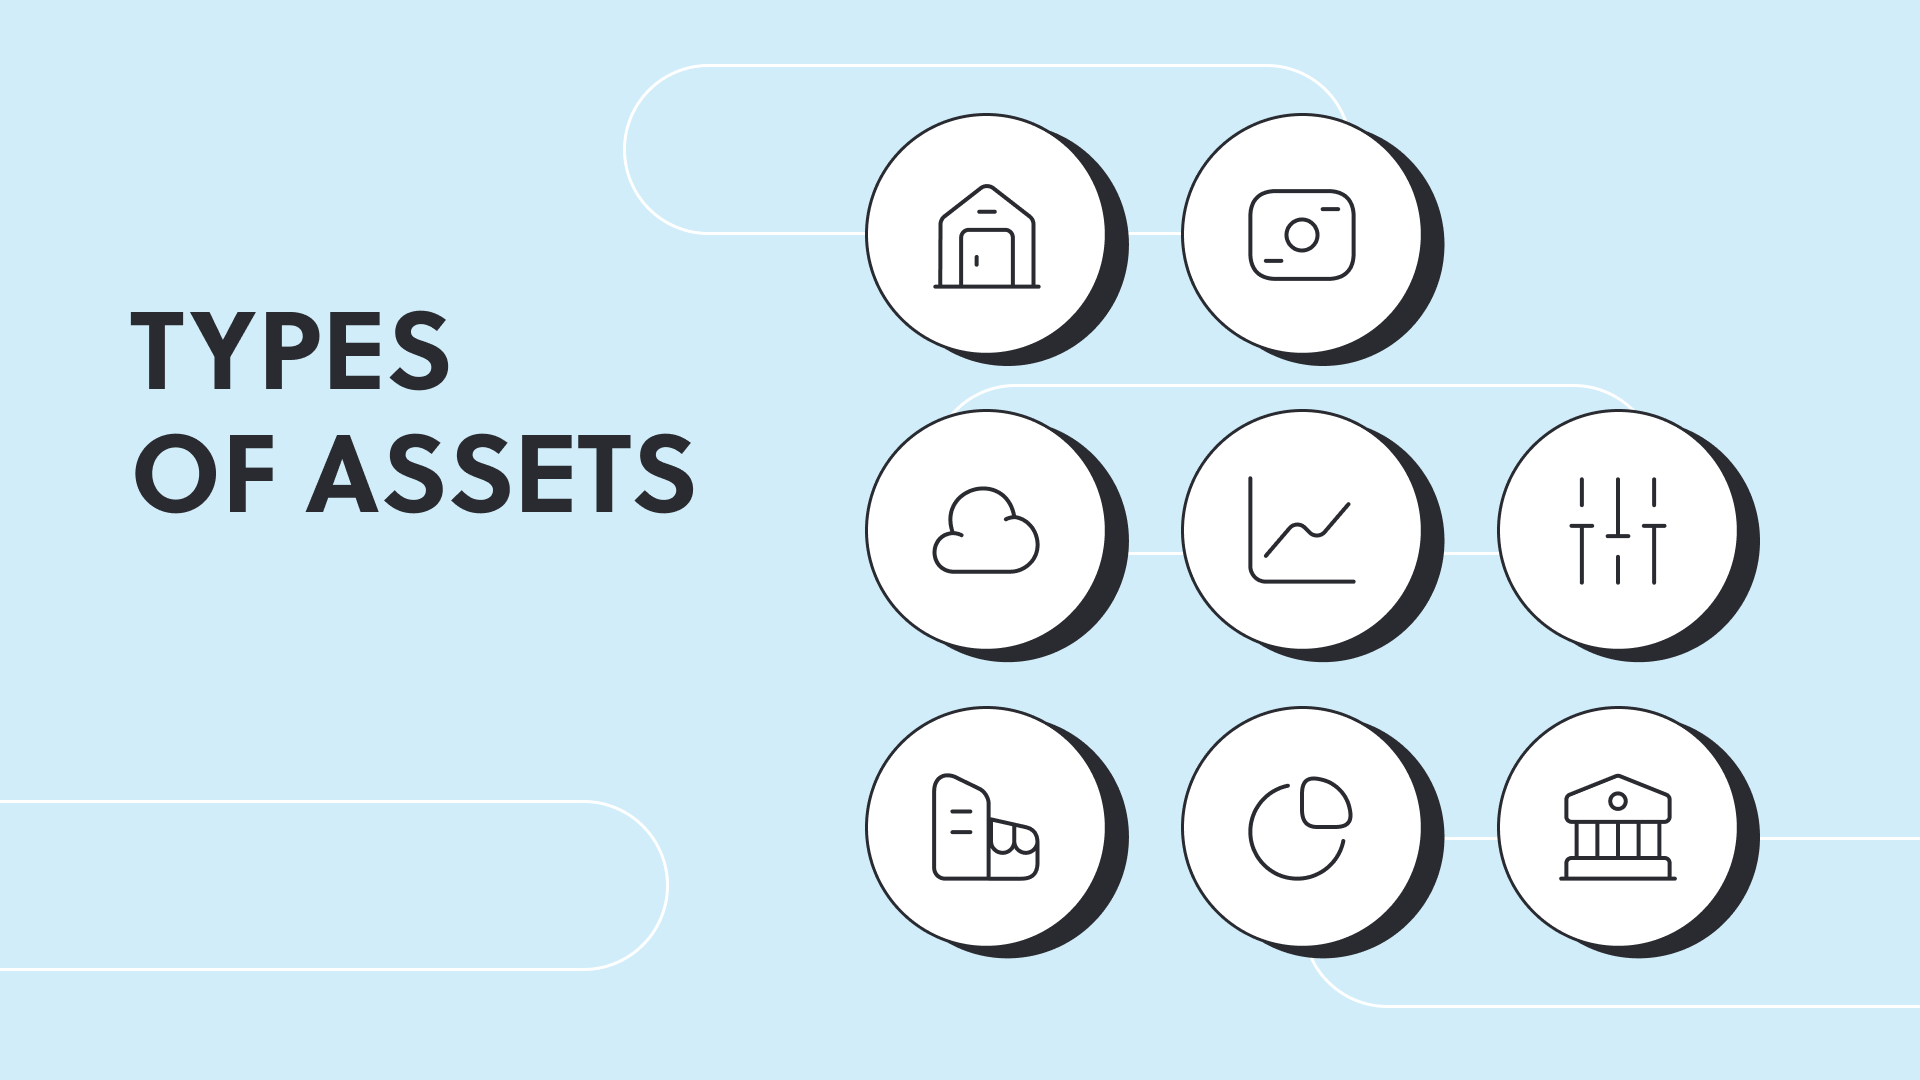 1.Types of Assets